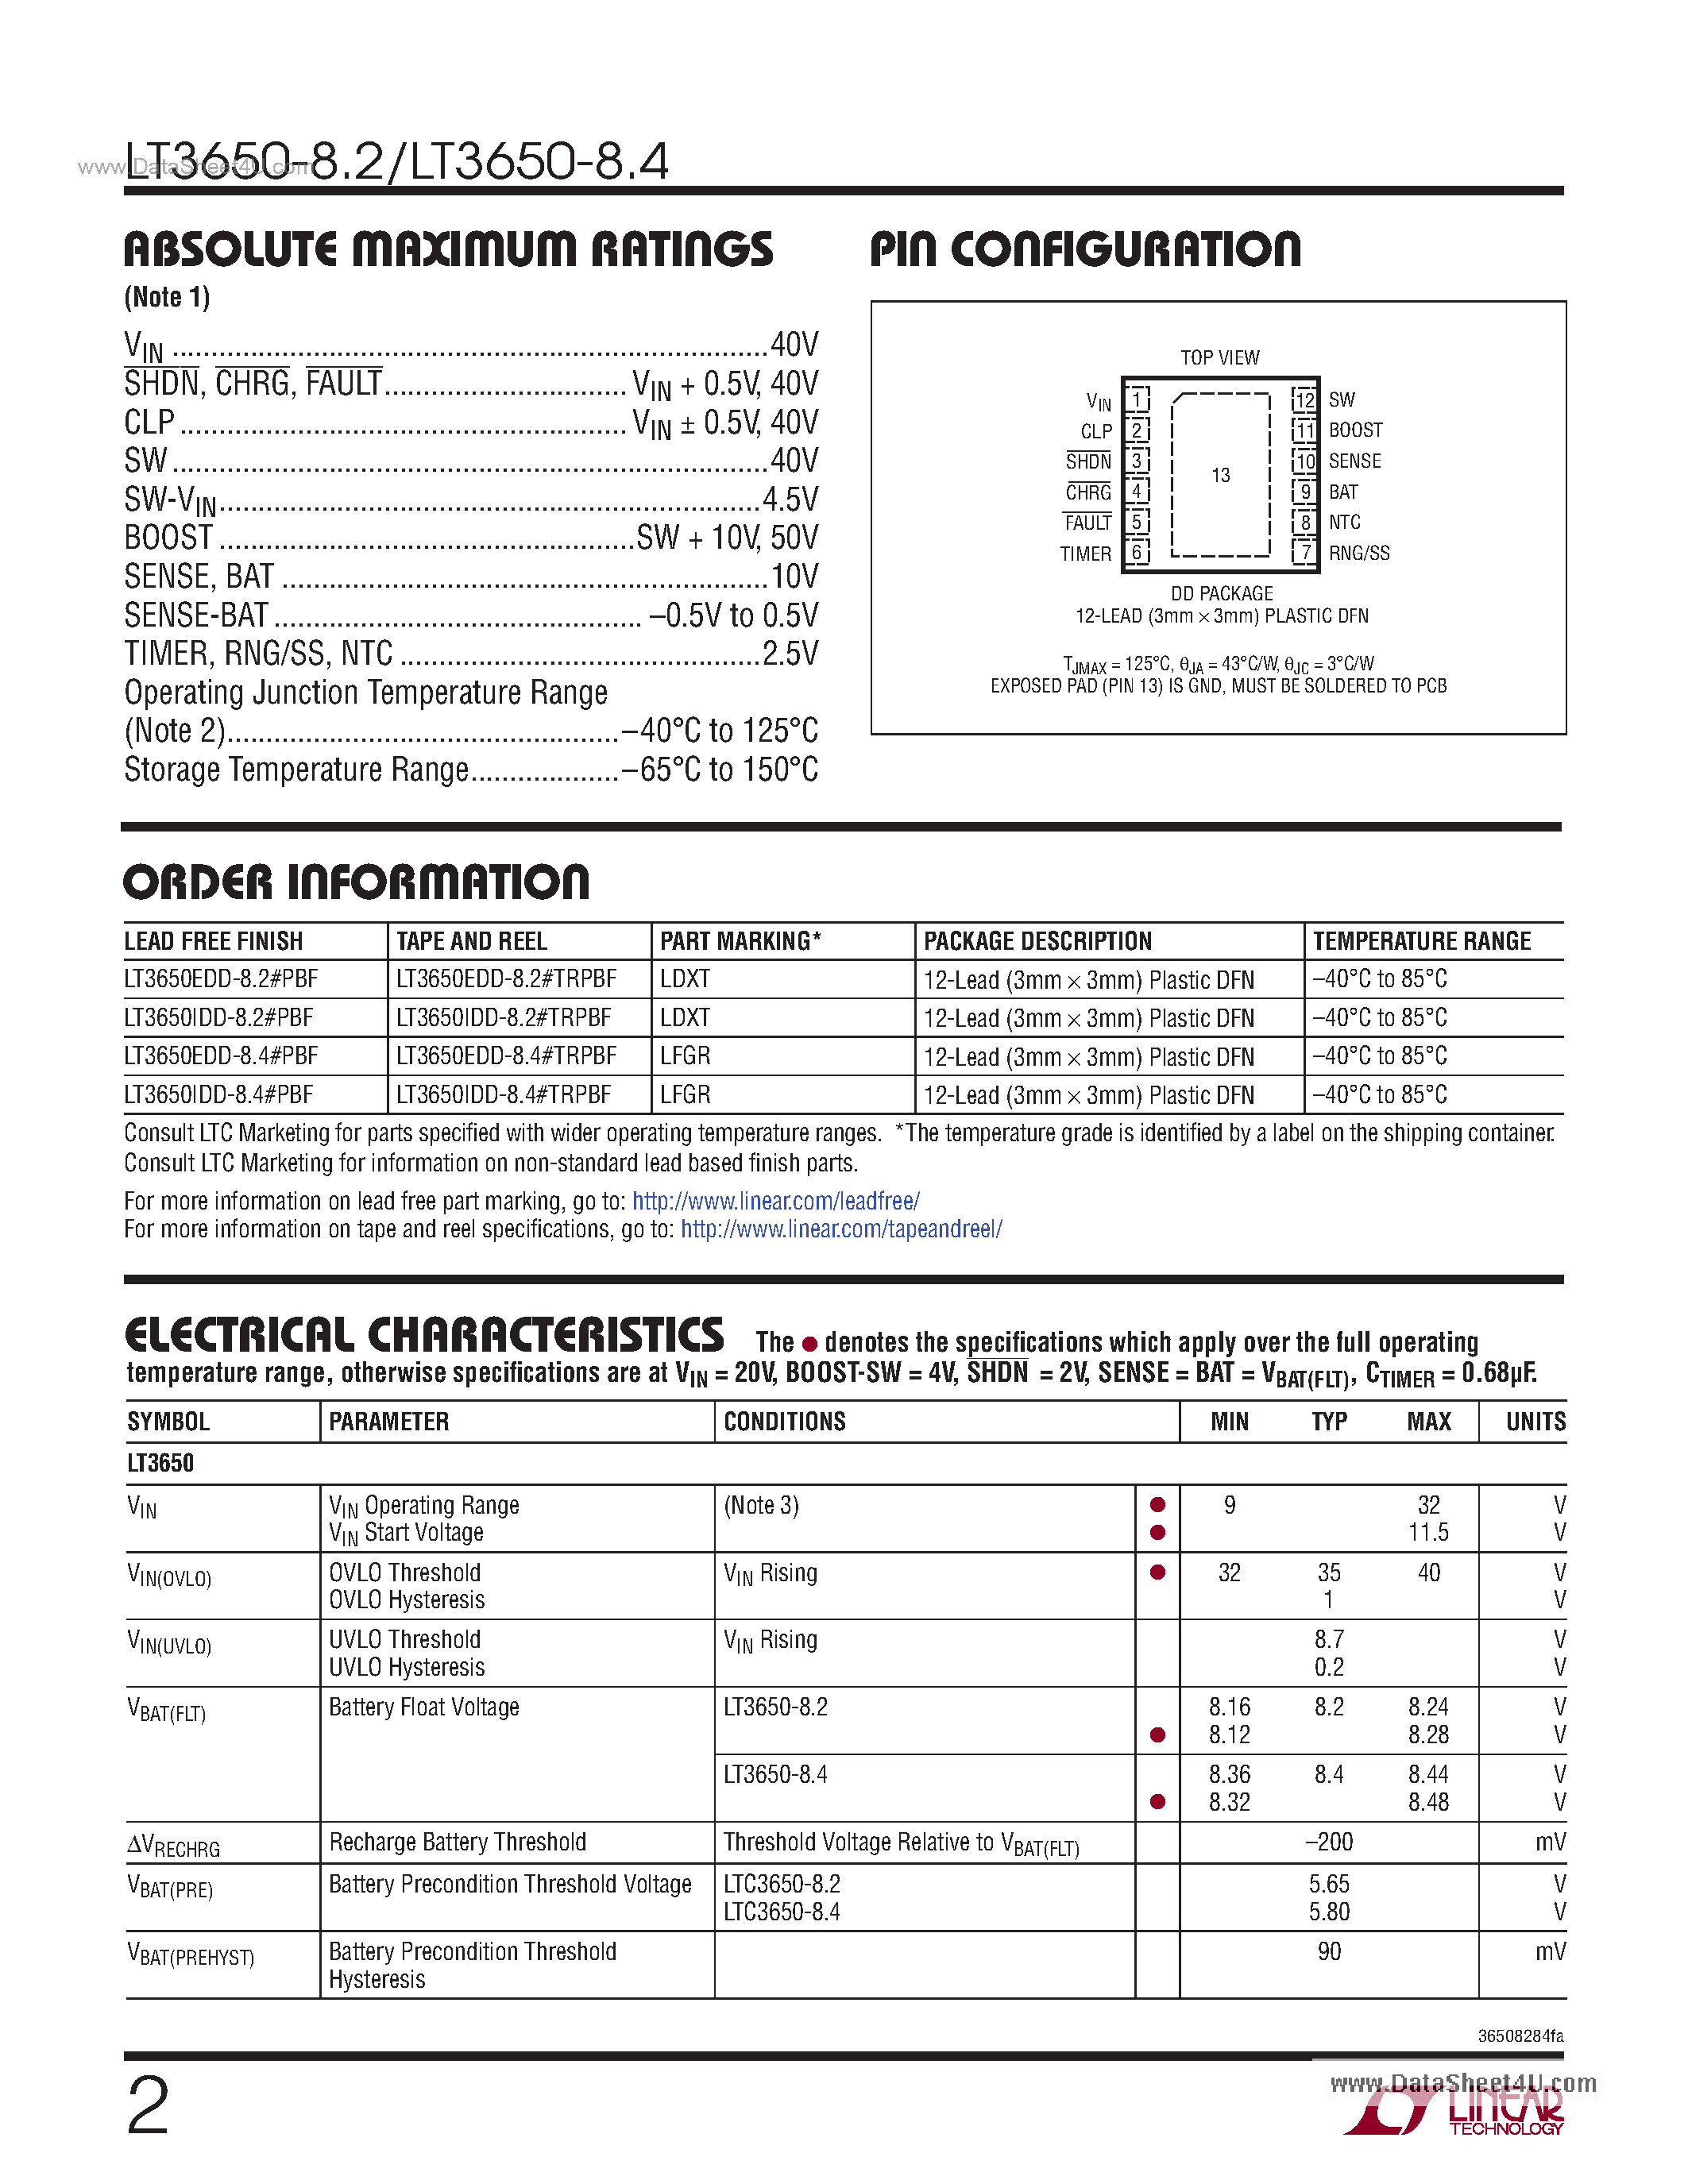 Datasheet LT3650-8.2 - (LT3650-8.2 / -8.4) High Voltage 2 Amp Monolithic Li-Ion Battery Charger page 2